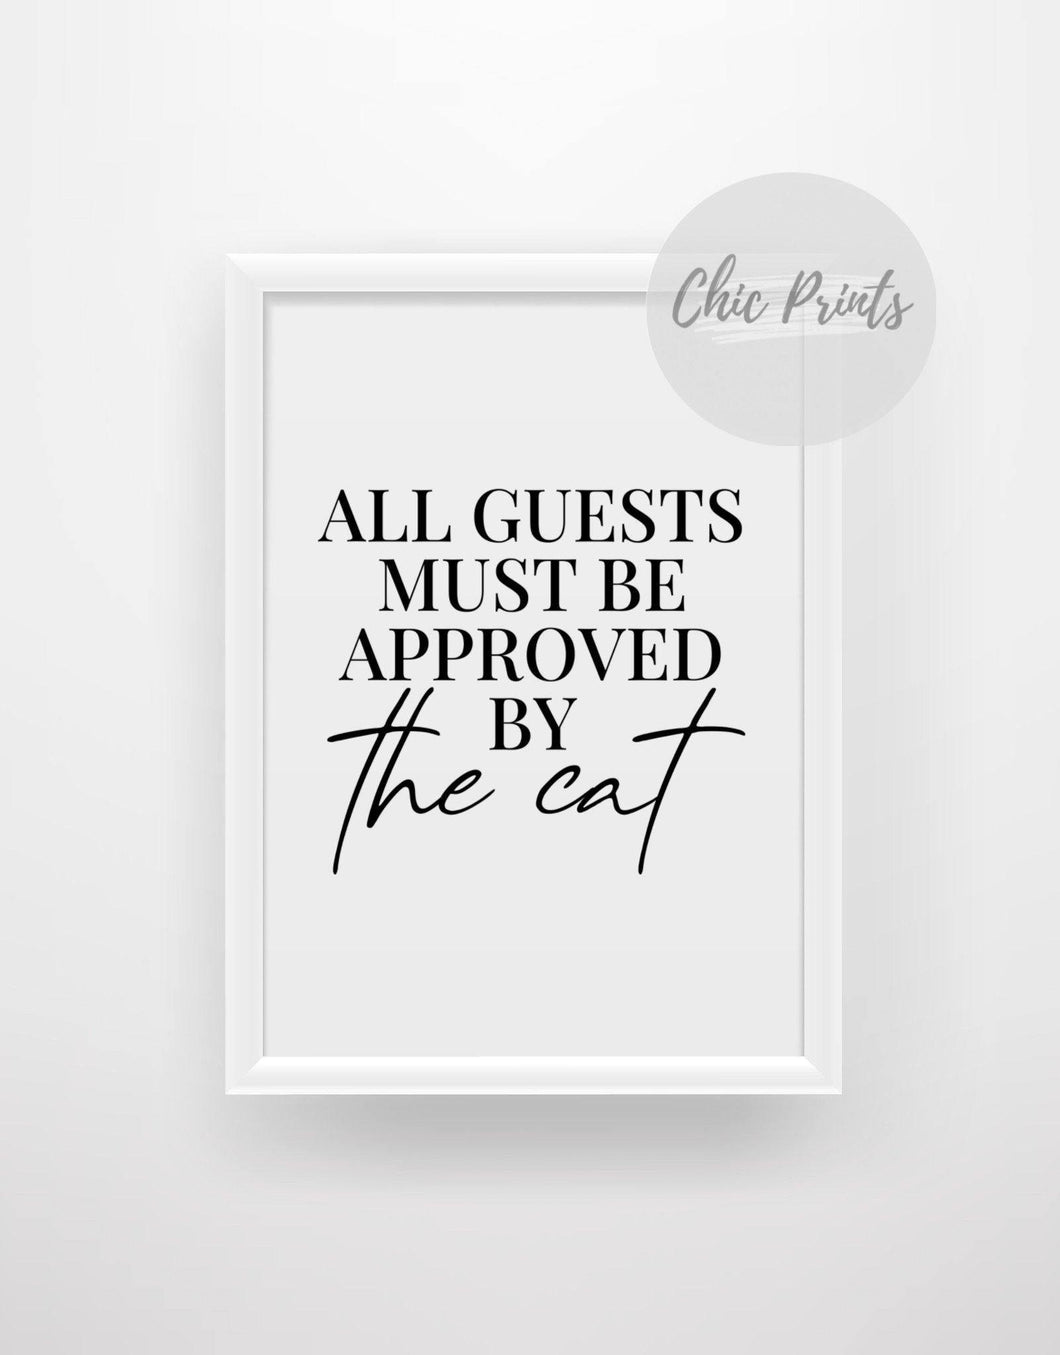 All guests must be approved by the Cat - Chic Prints